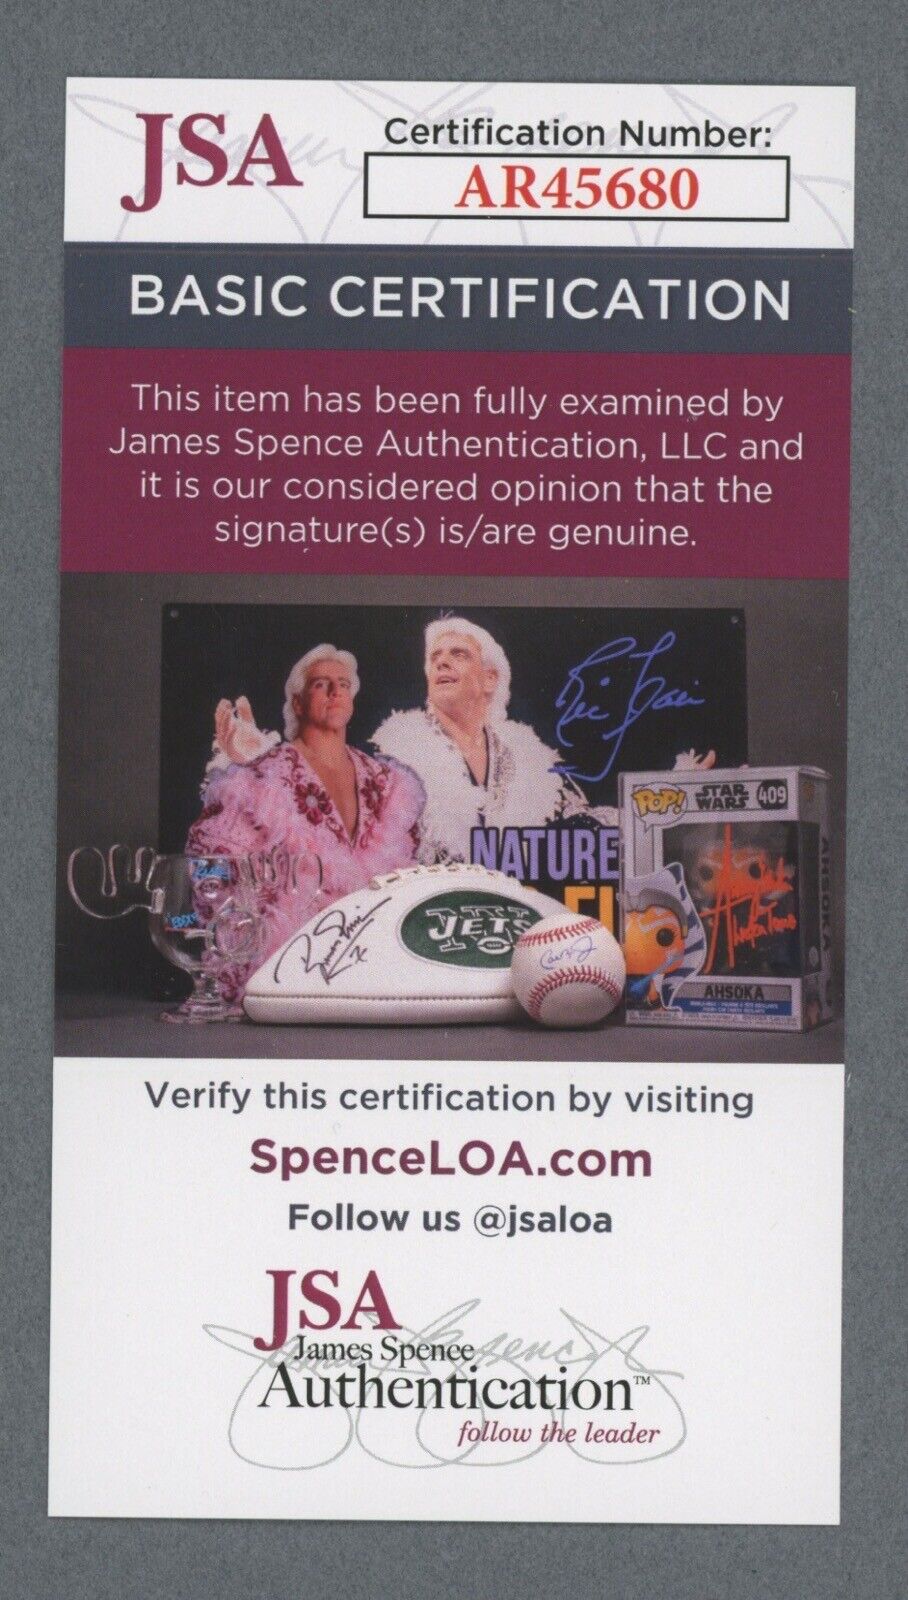 George Steinbrenner Signed Index Card Auto with JSA Certification